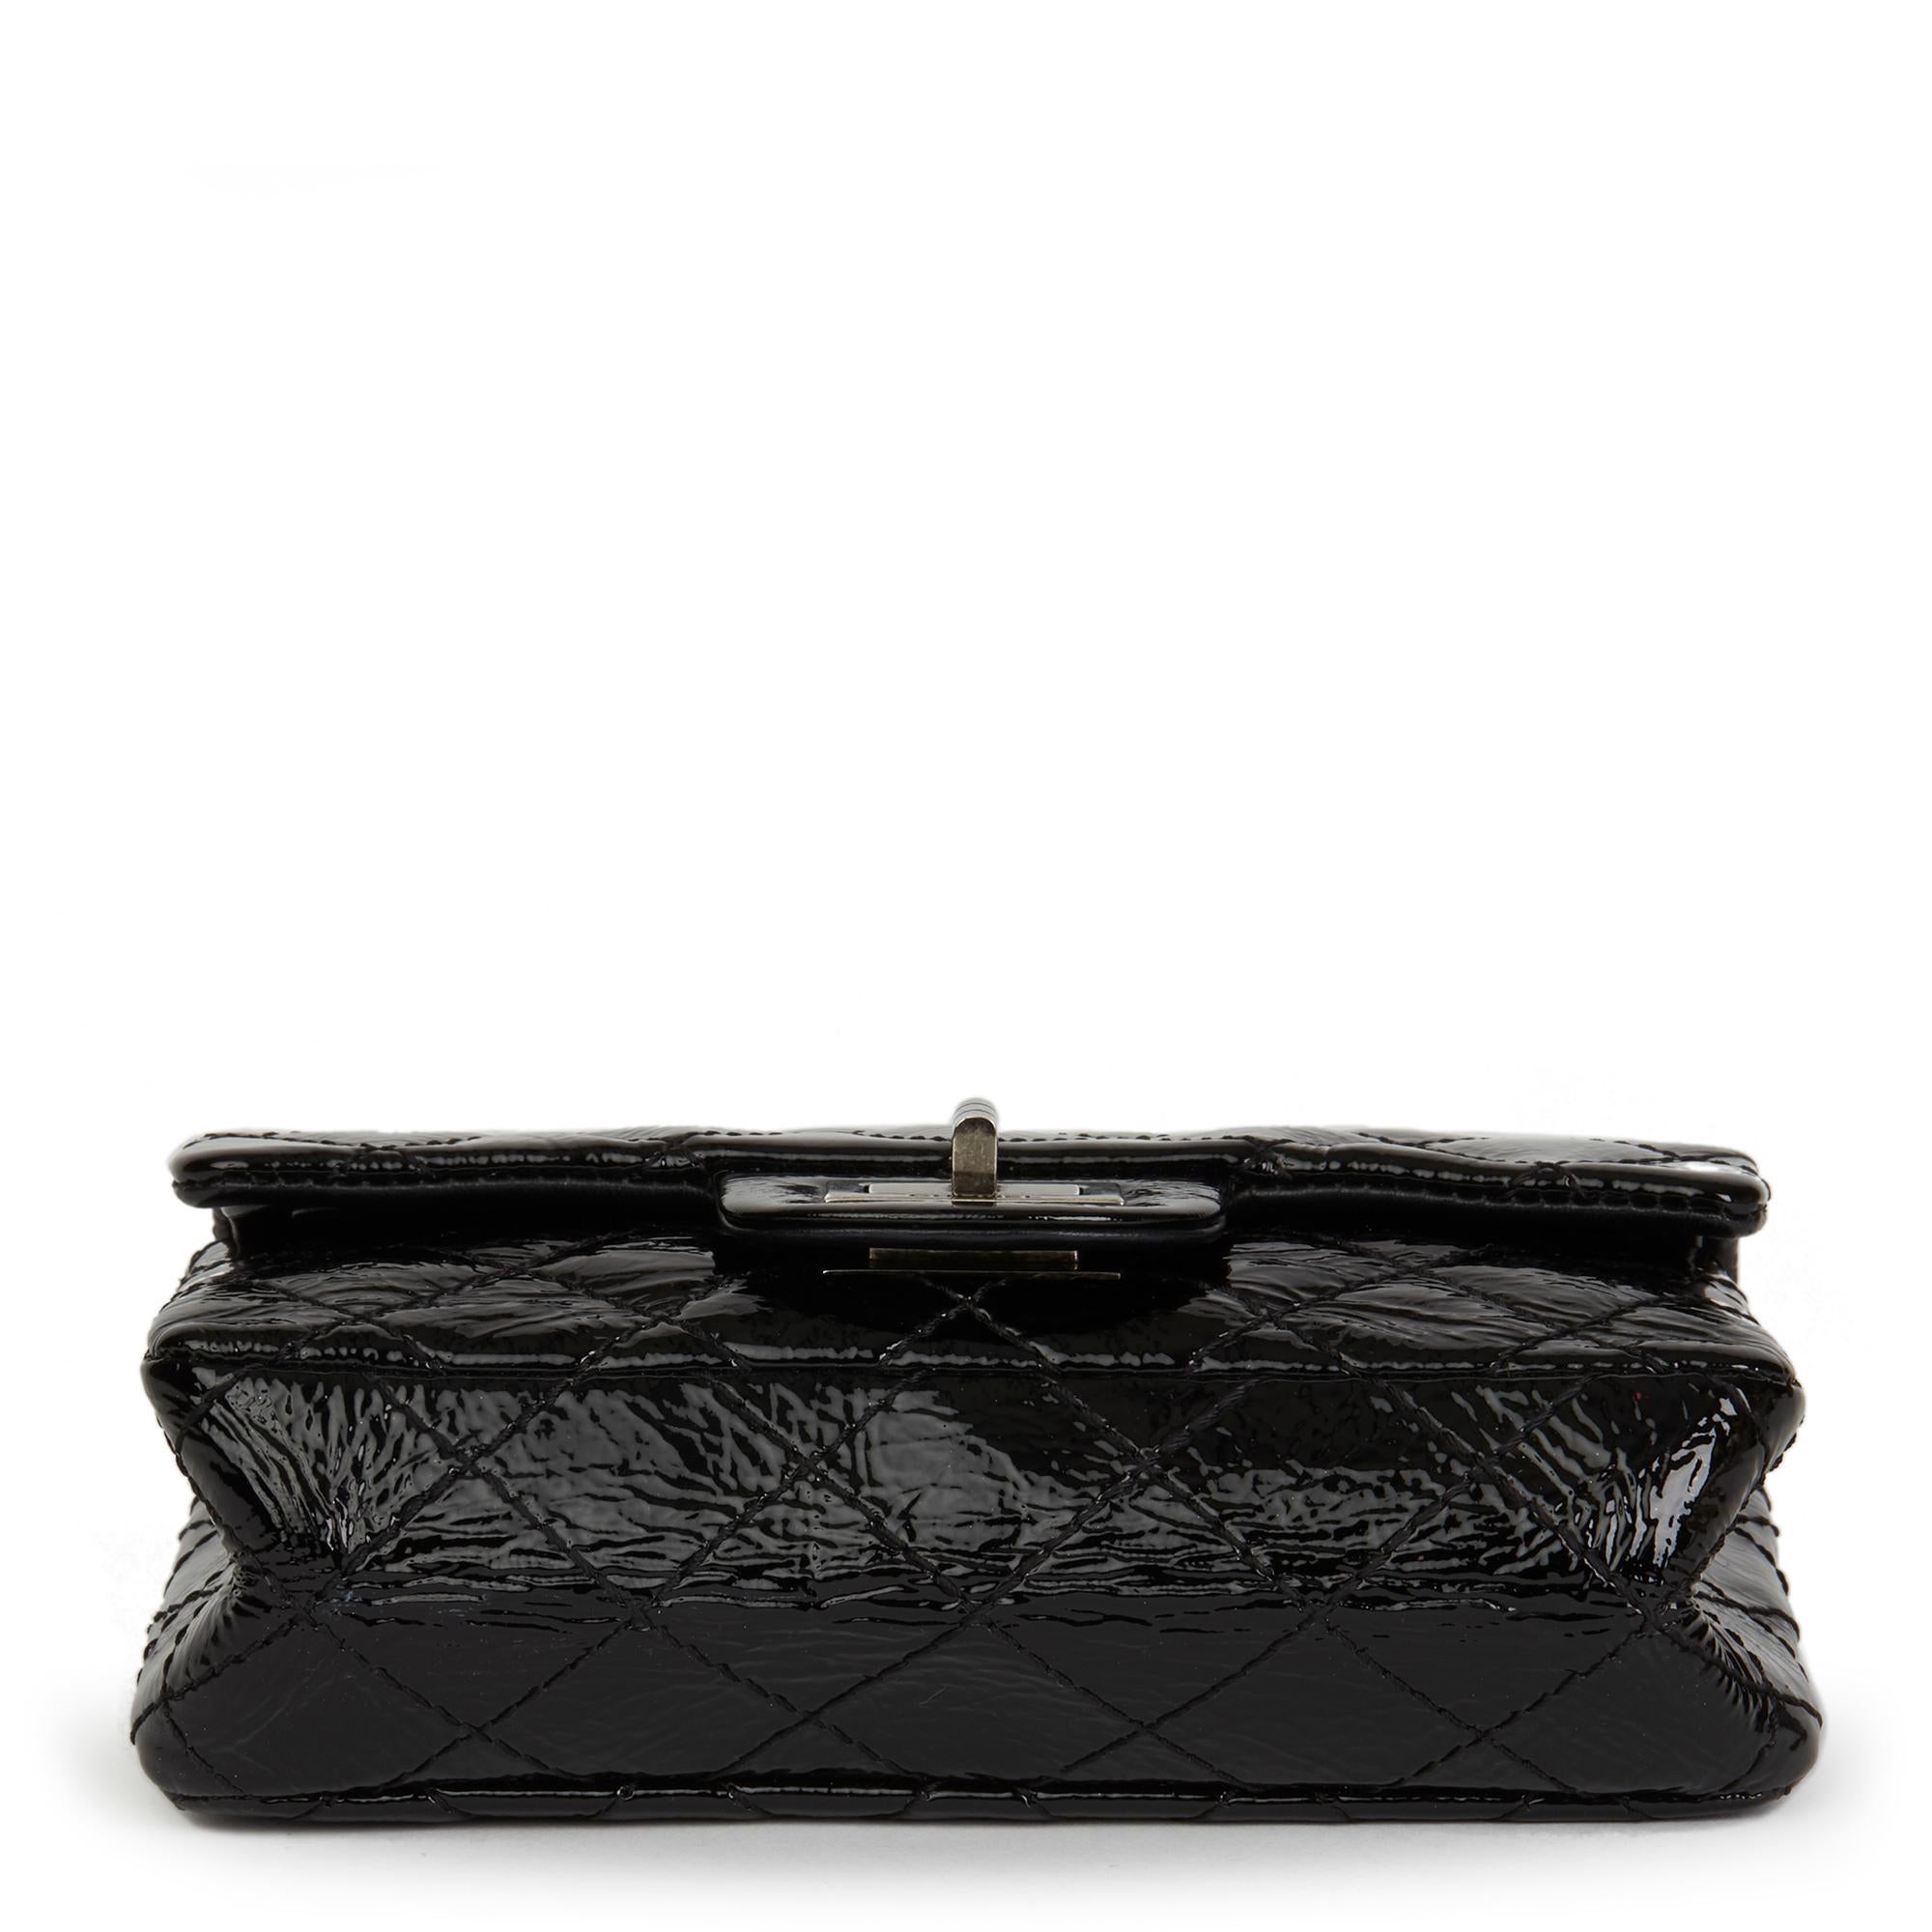 2007 Chanel Black Quilted Aged Patent Leather 2.55 Reissue Clutch 1